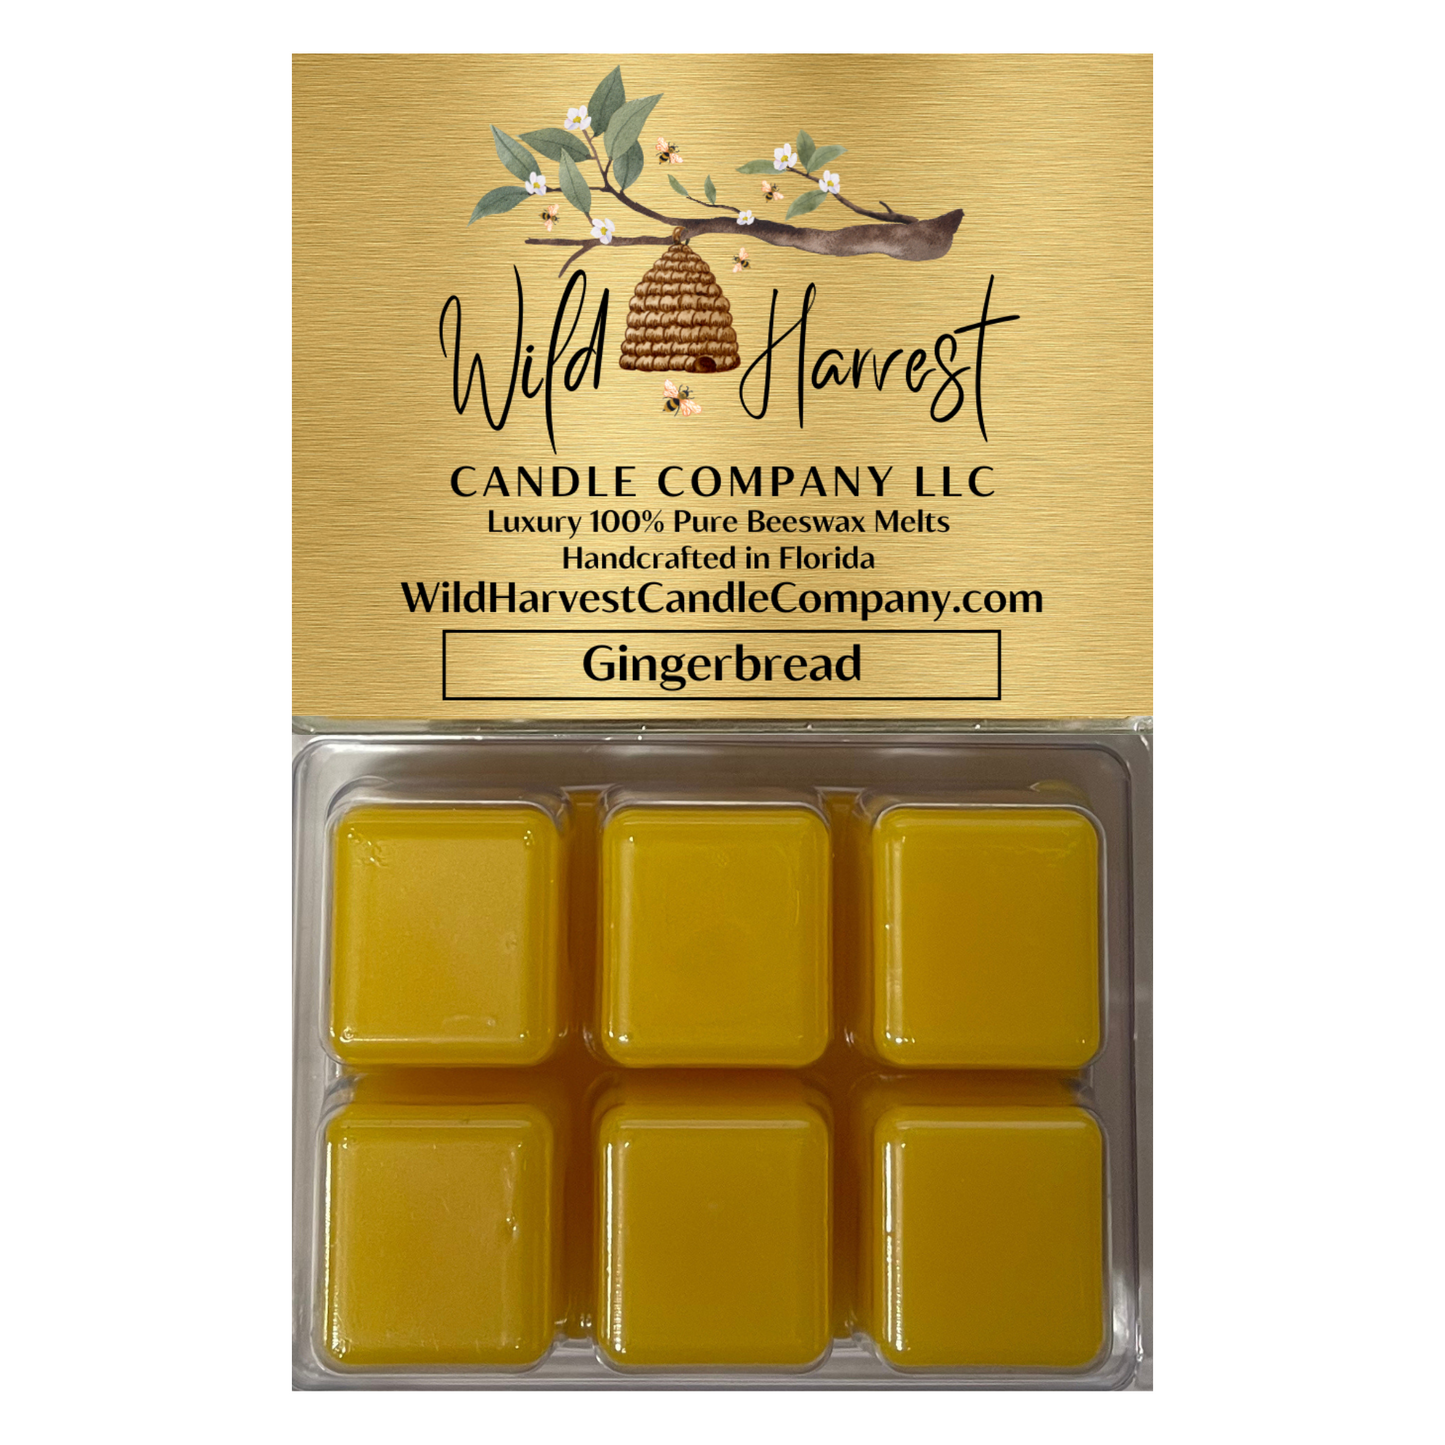 Gingerbread Scented - Pure Beeswax Melts (1-Pack)